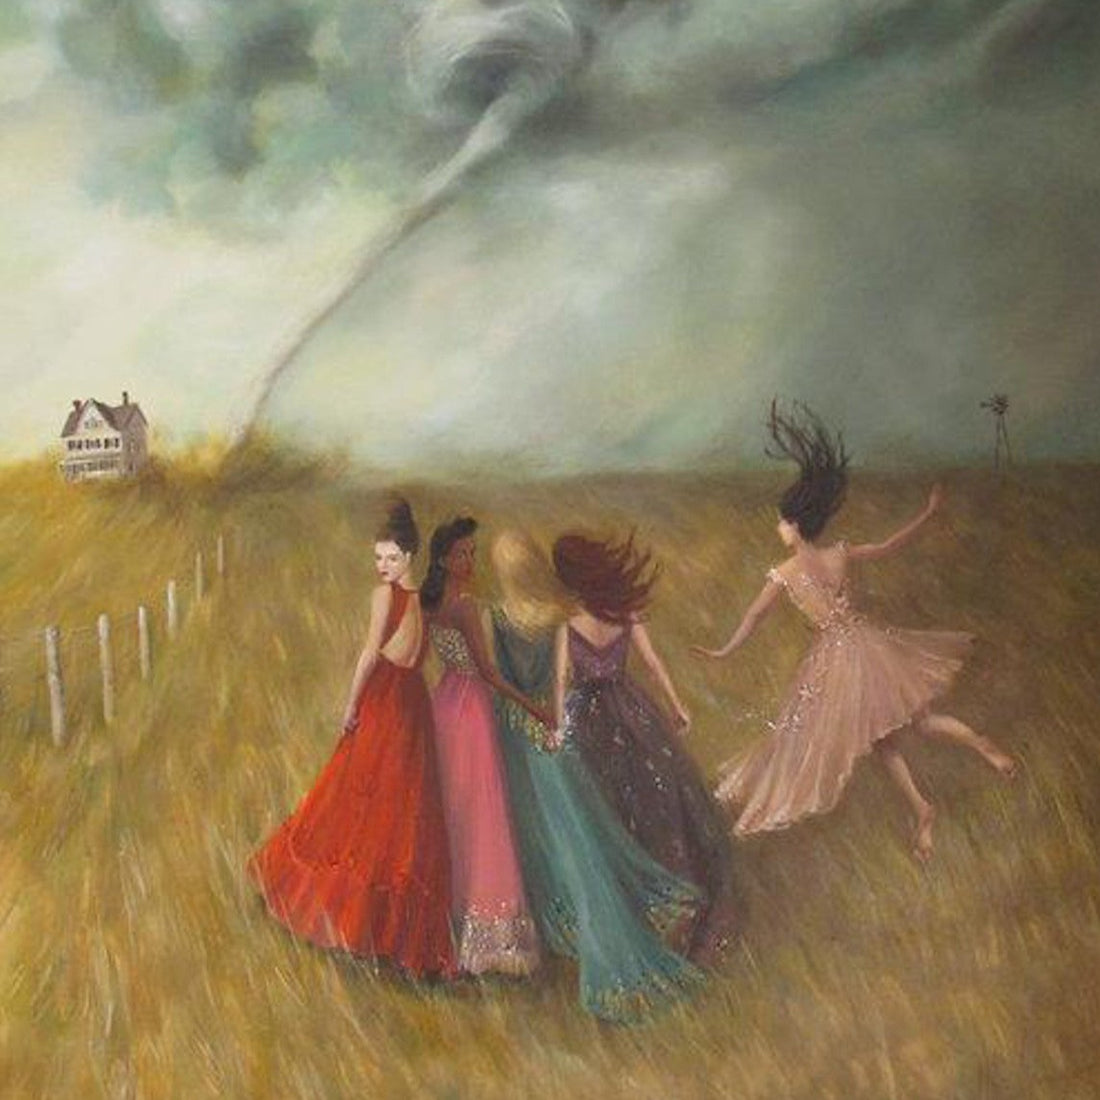 Three women in elegant dresses, captured by Janet Hill, are running through a field with a tornado in the background.